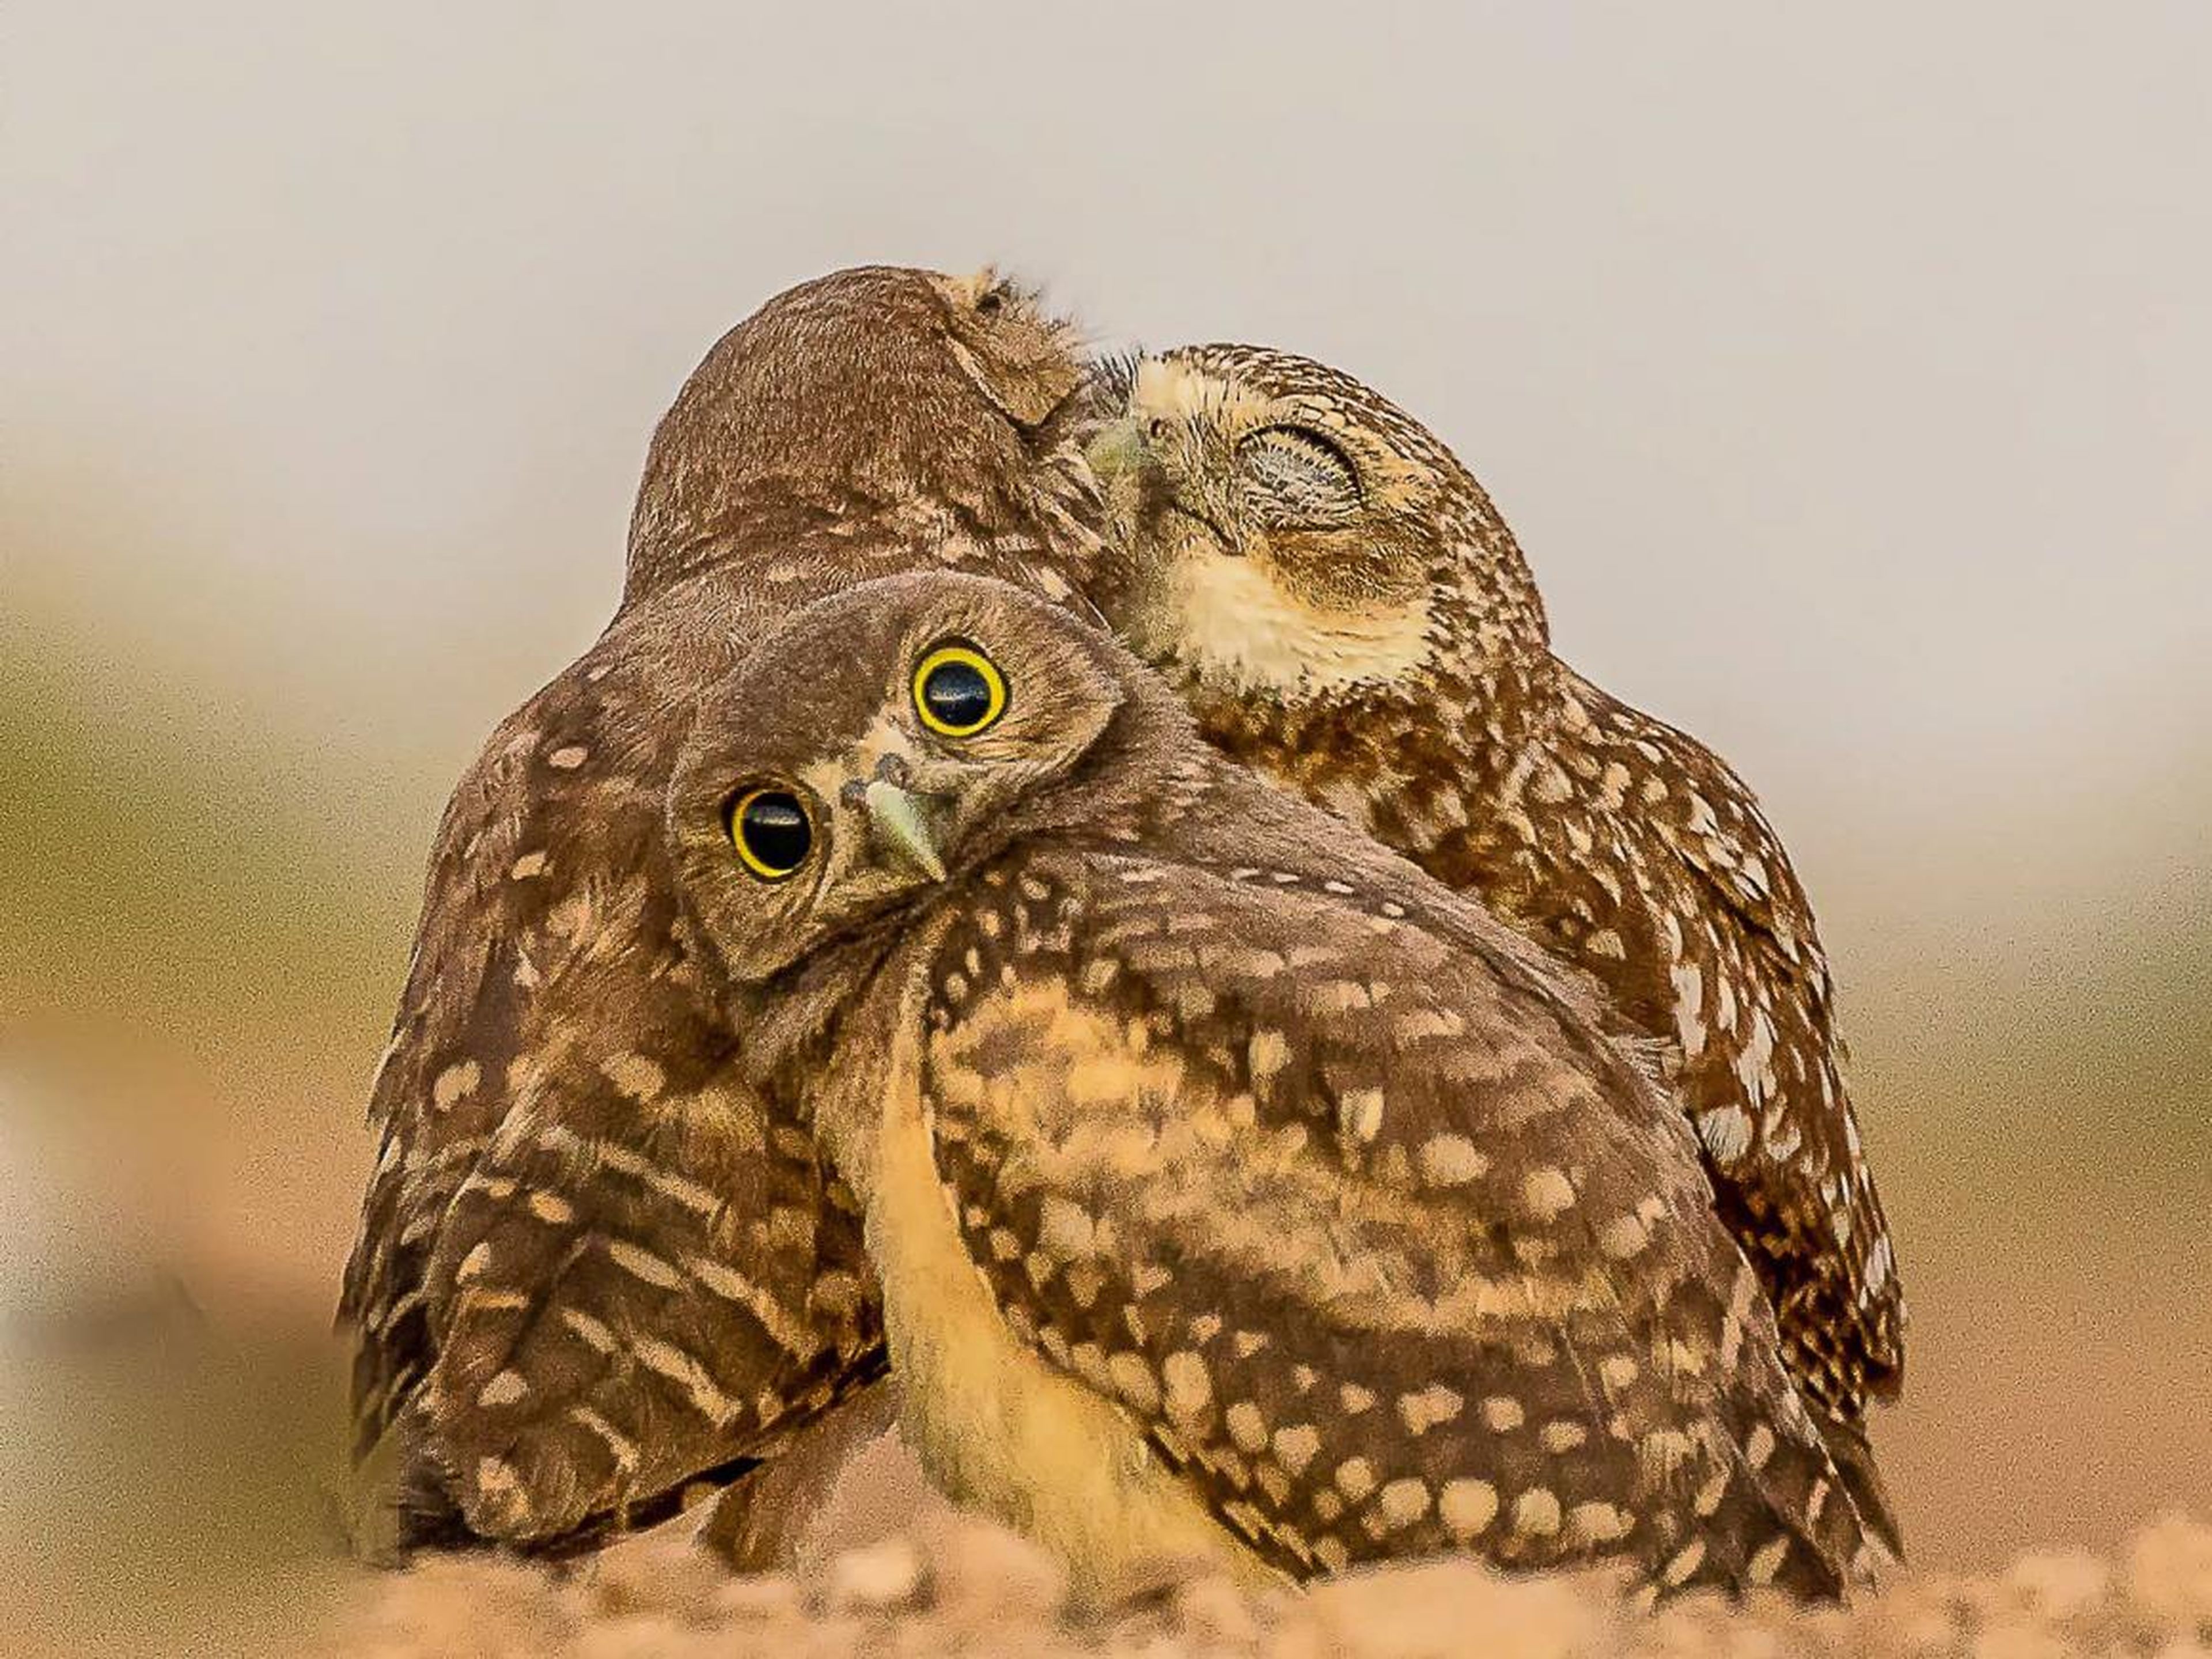 Owls also get grossed out by their friends' PDA.